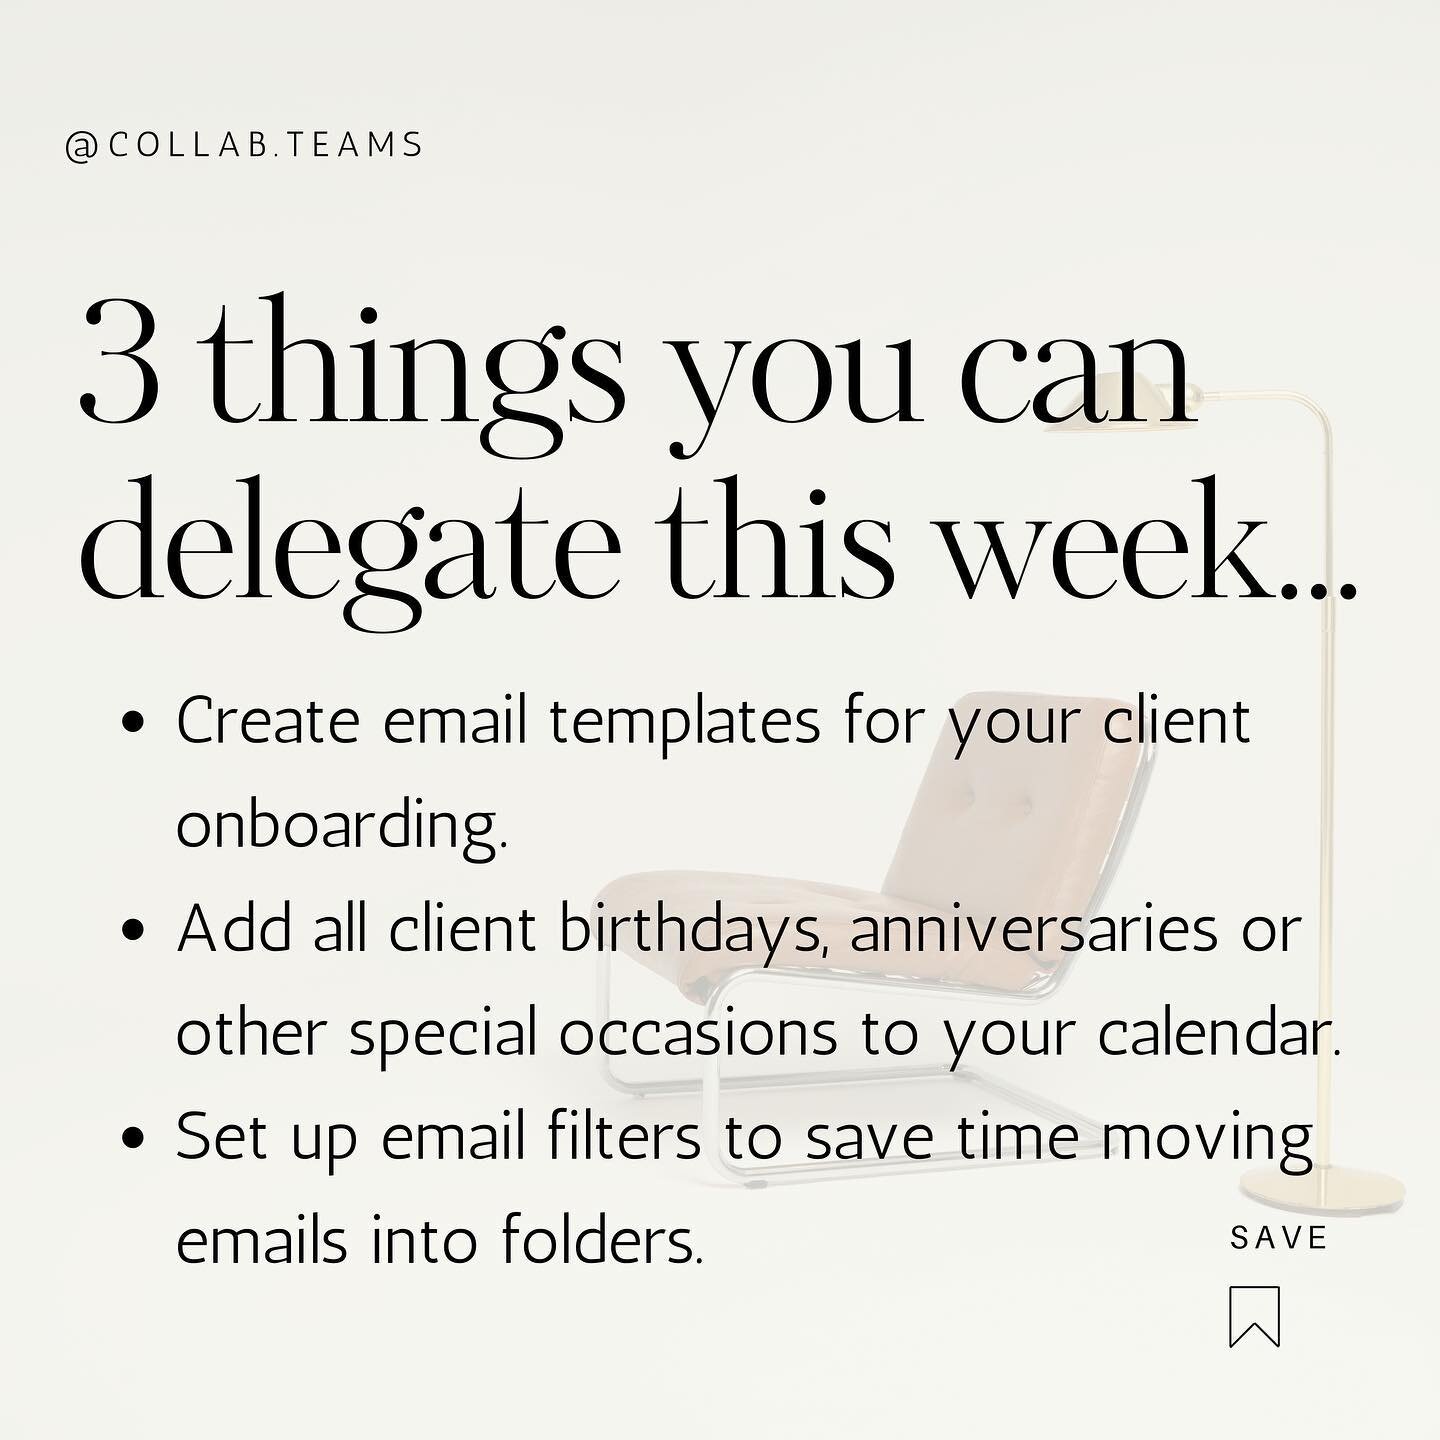 Here are 3 things you can delegate to your amazing Collaborator or Virtual Assistant this week 🫶🏻

1️⃣ Create email templates for your client onboarding. 

2️⃣ Add all client birthdays, anniversaries or other special occasions to your calendar. 

3